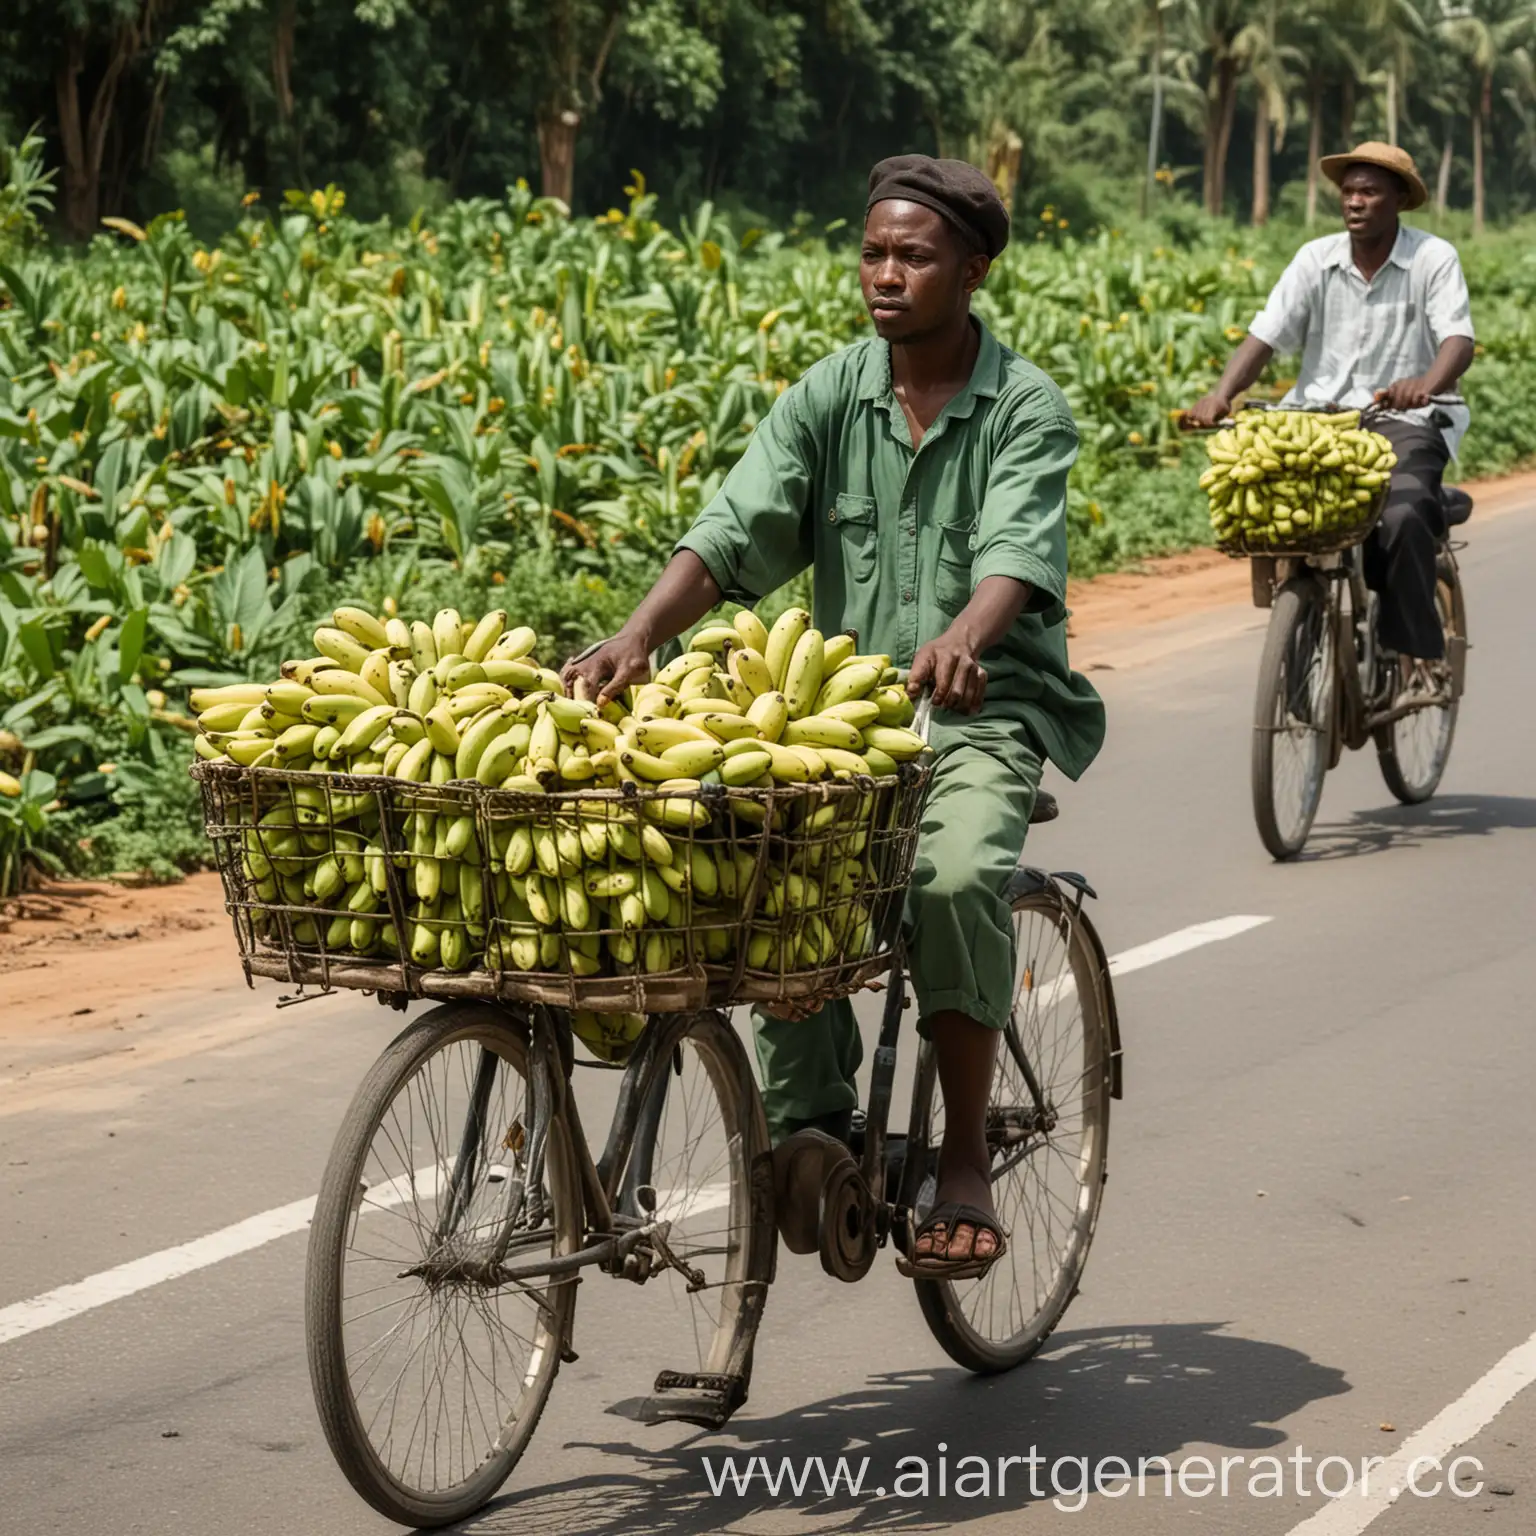 African-People-Riding-Bicycles-Transporting-Green-Bananas